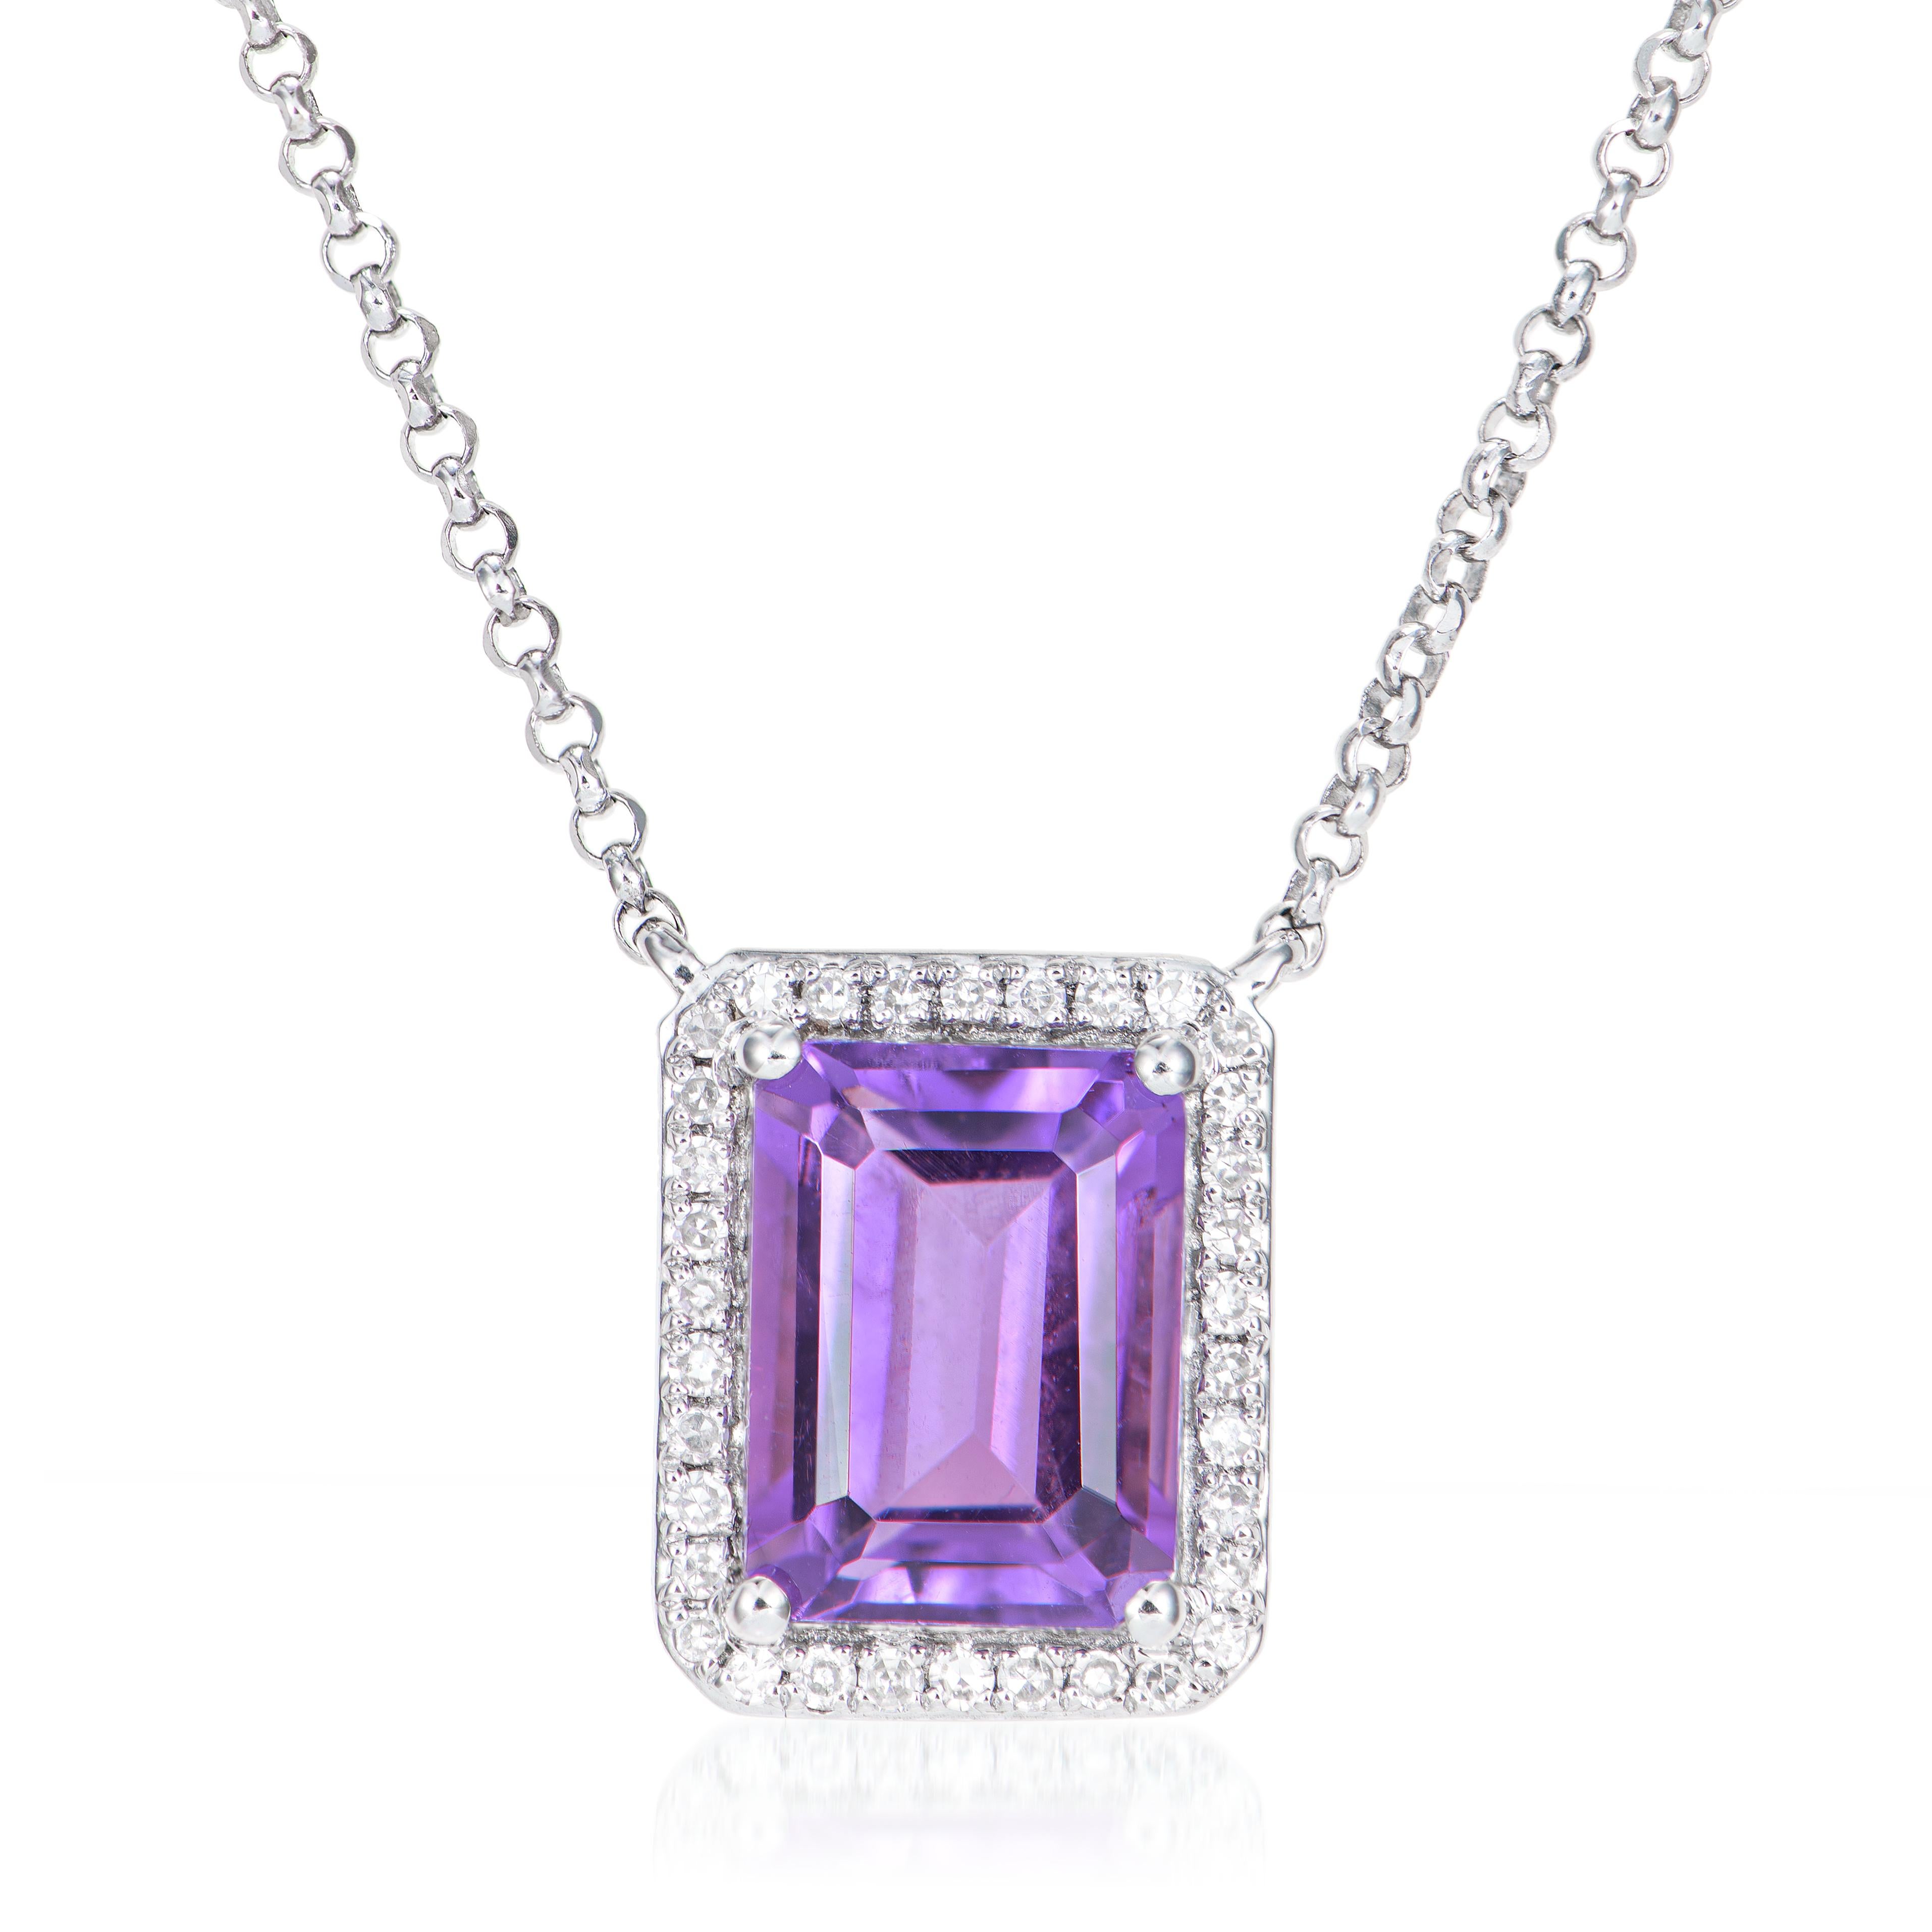 Contemporary 1.40 Carat Amethyst Pendant in 18Karat White Gold with White Diamond. For Sale